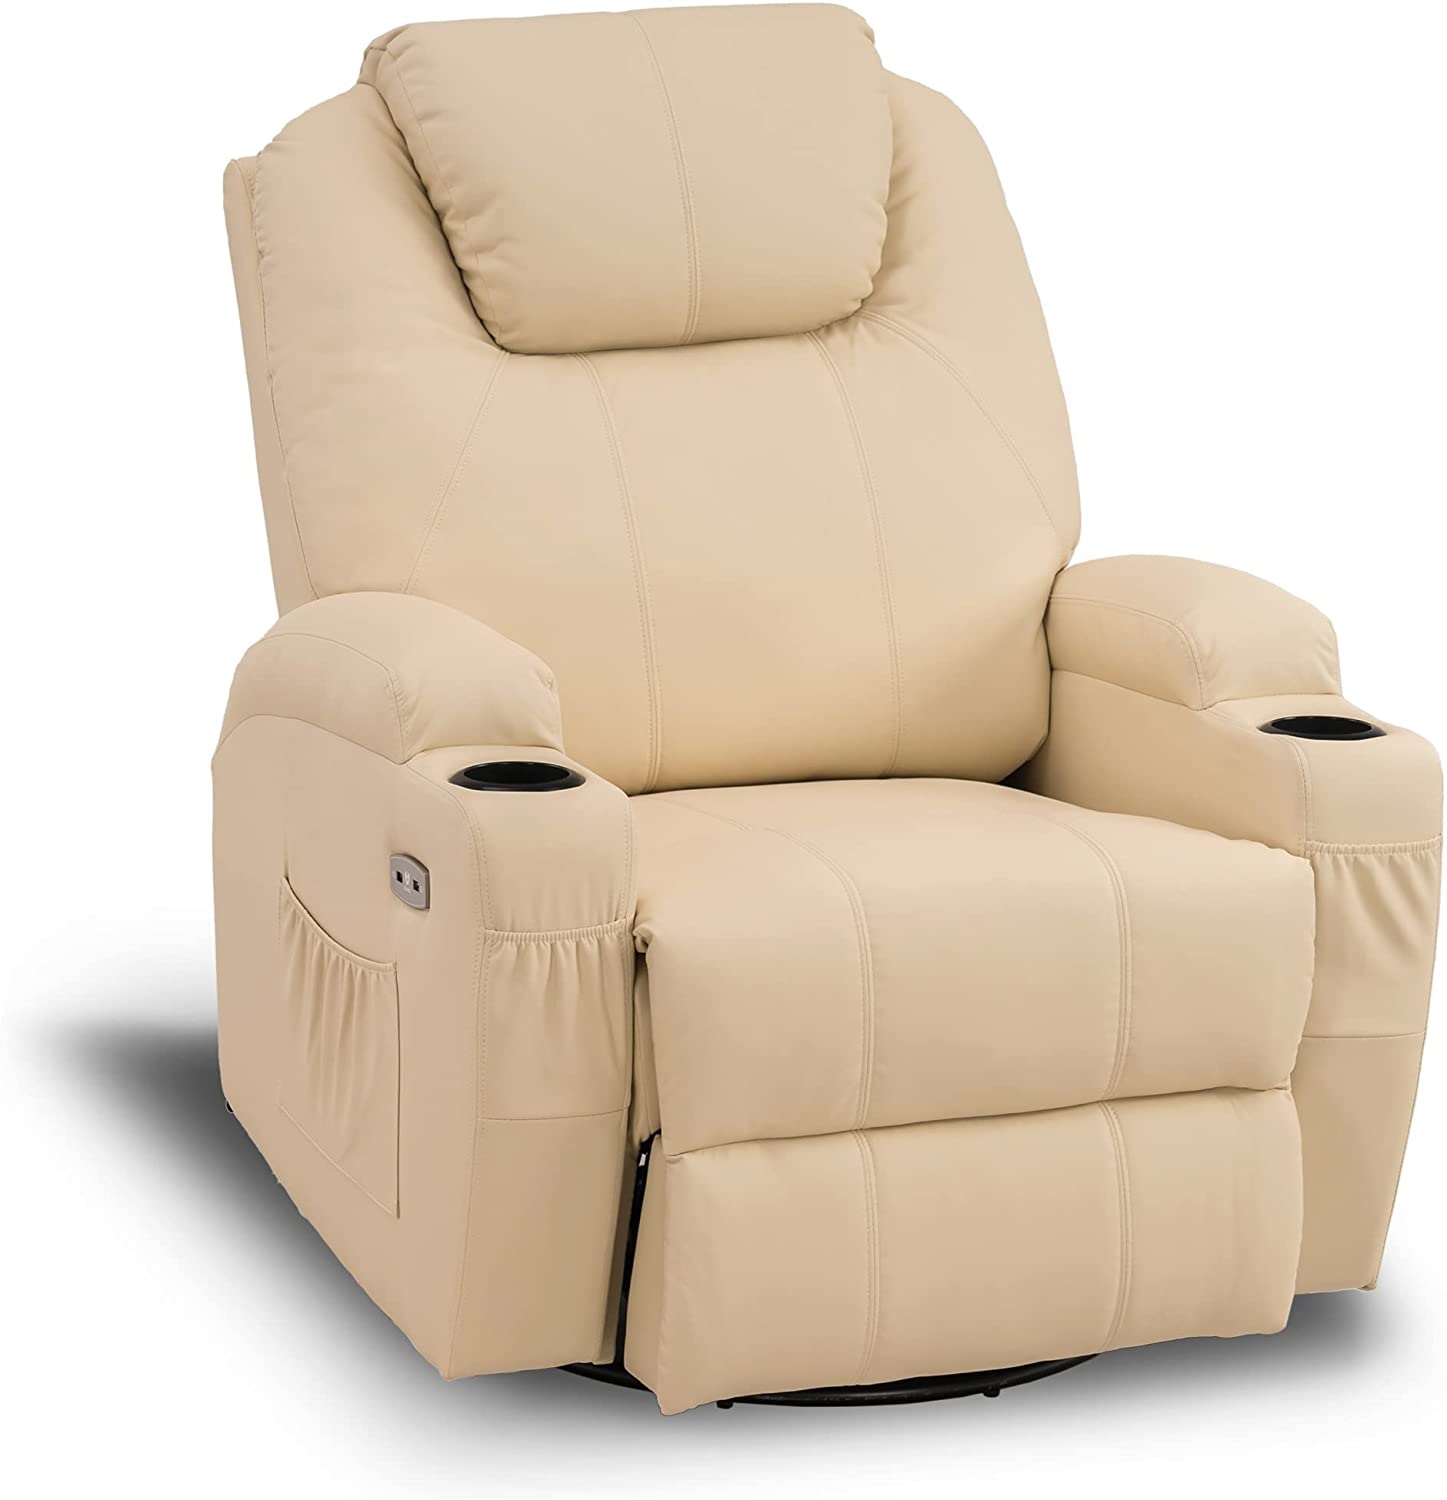 Mcombo Manual Swivel Glider Rocker Recliner Chair with Massage and Heat